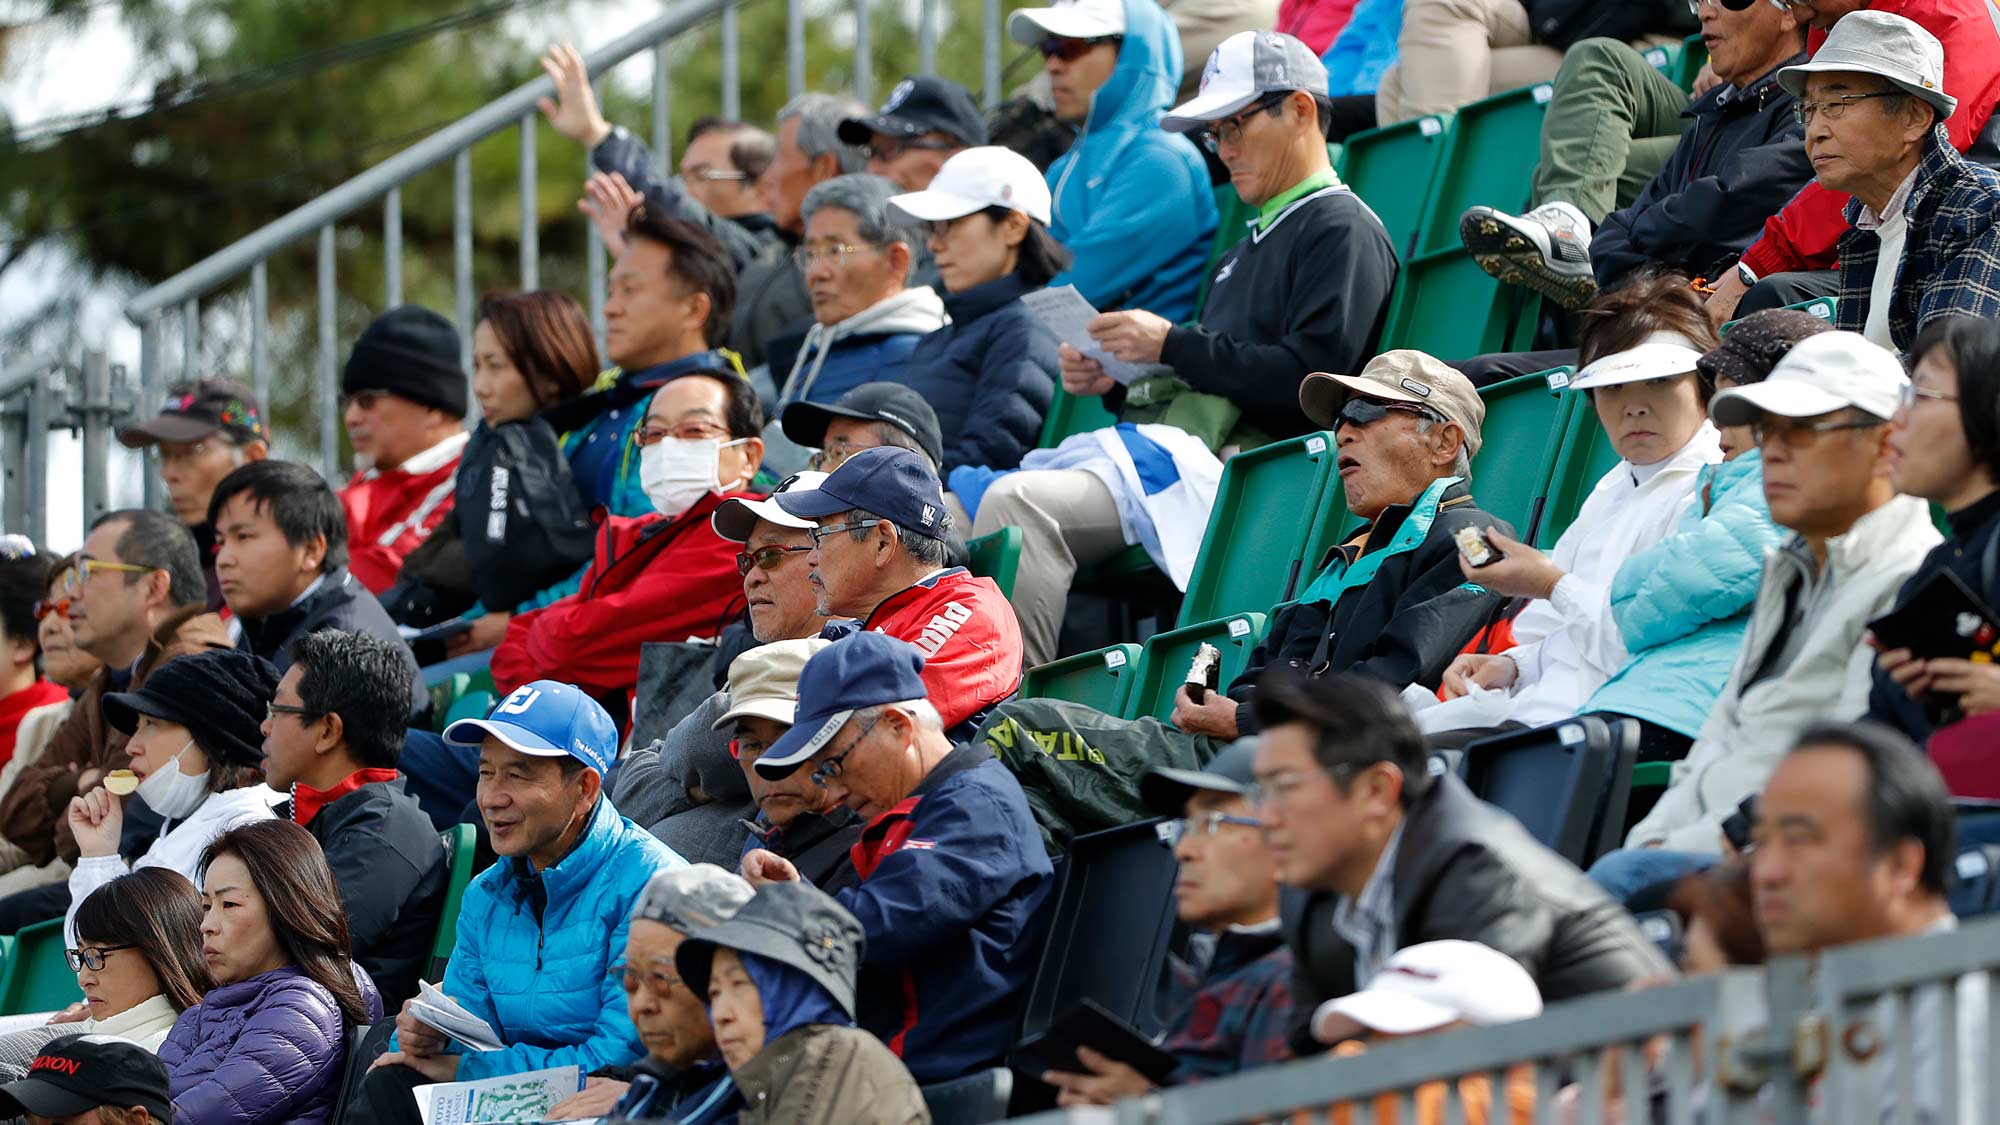 Fans watching from the Stands at the first round of the TOTO Japan Classic